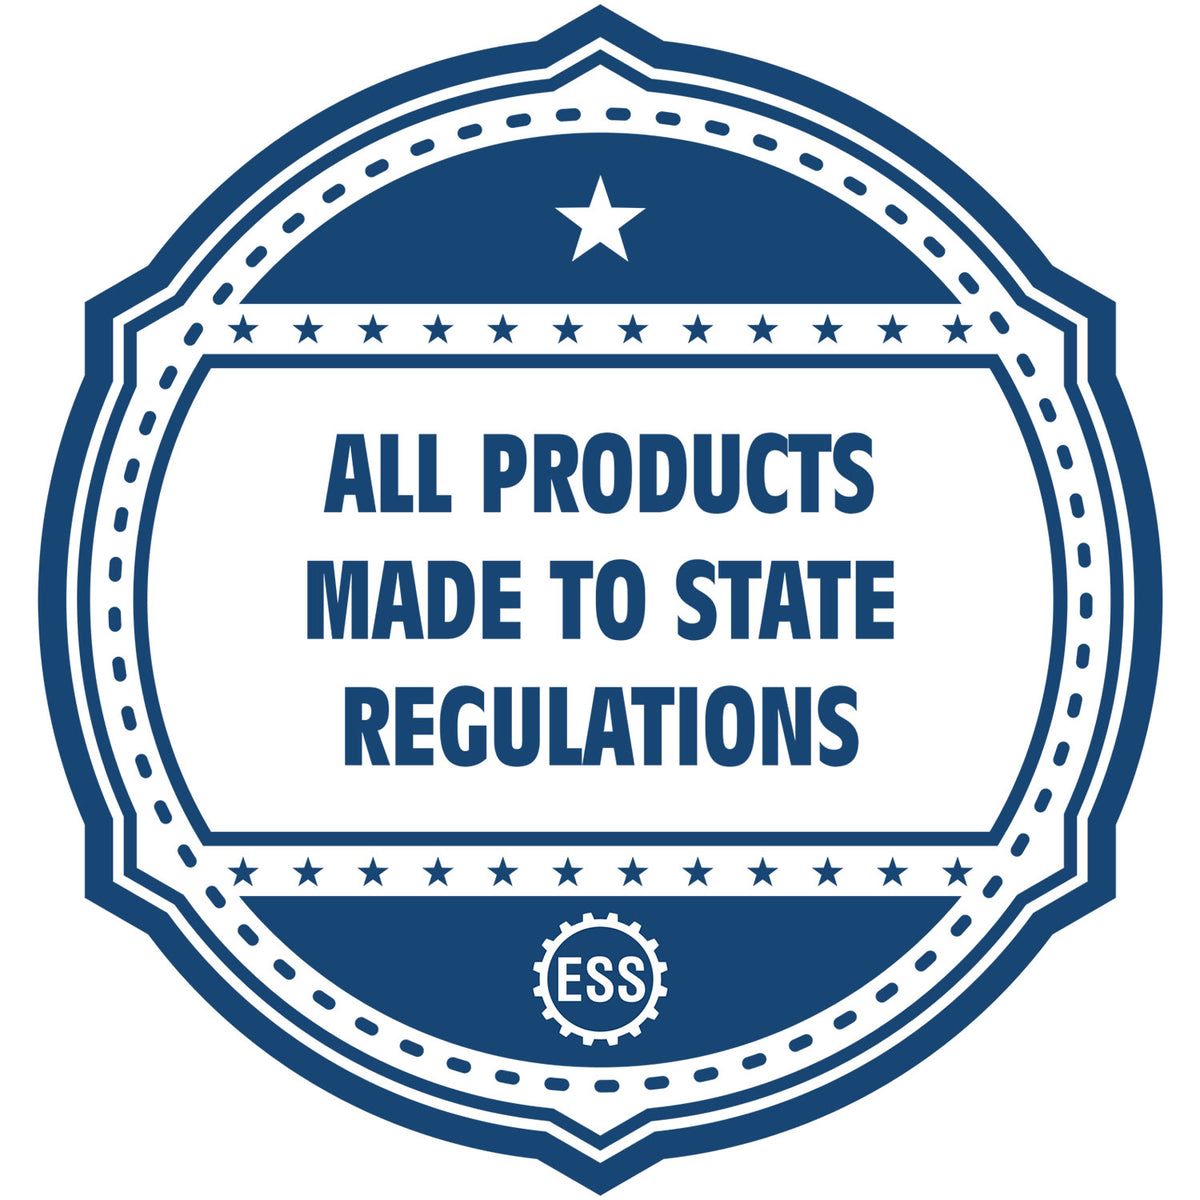 An icon or badge element for the Nebraska Desk Architect Embossing Seal showing that this product is made in compliance with state regulations.